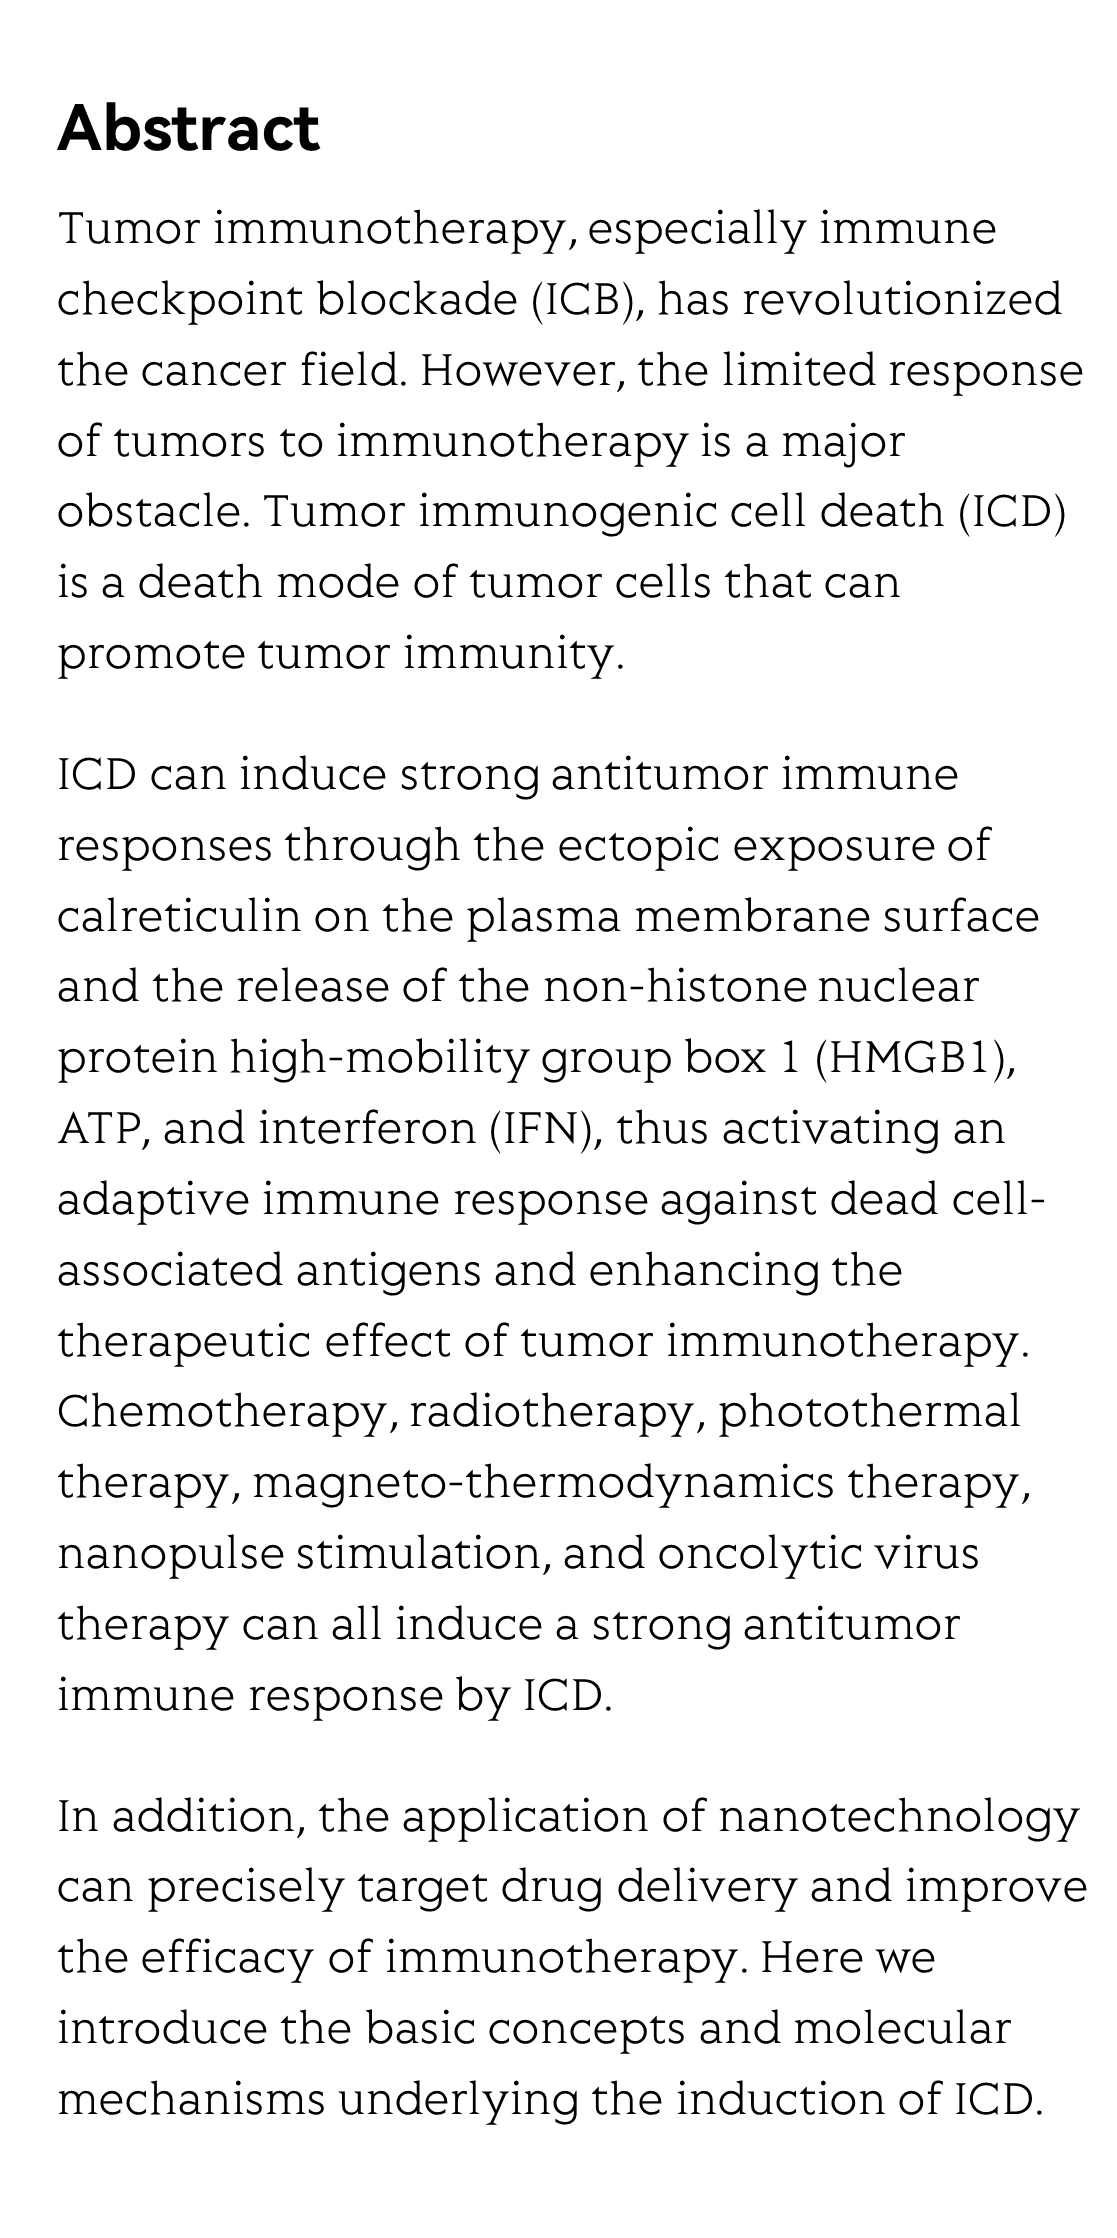 Applying nanotechnology to boost cancer immunotherapy by promoting immunogenic cell death_2